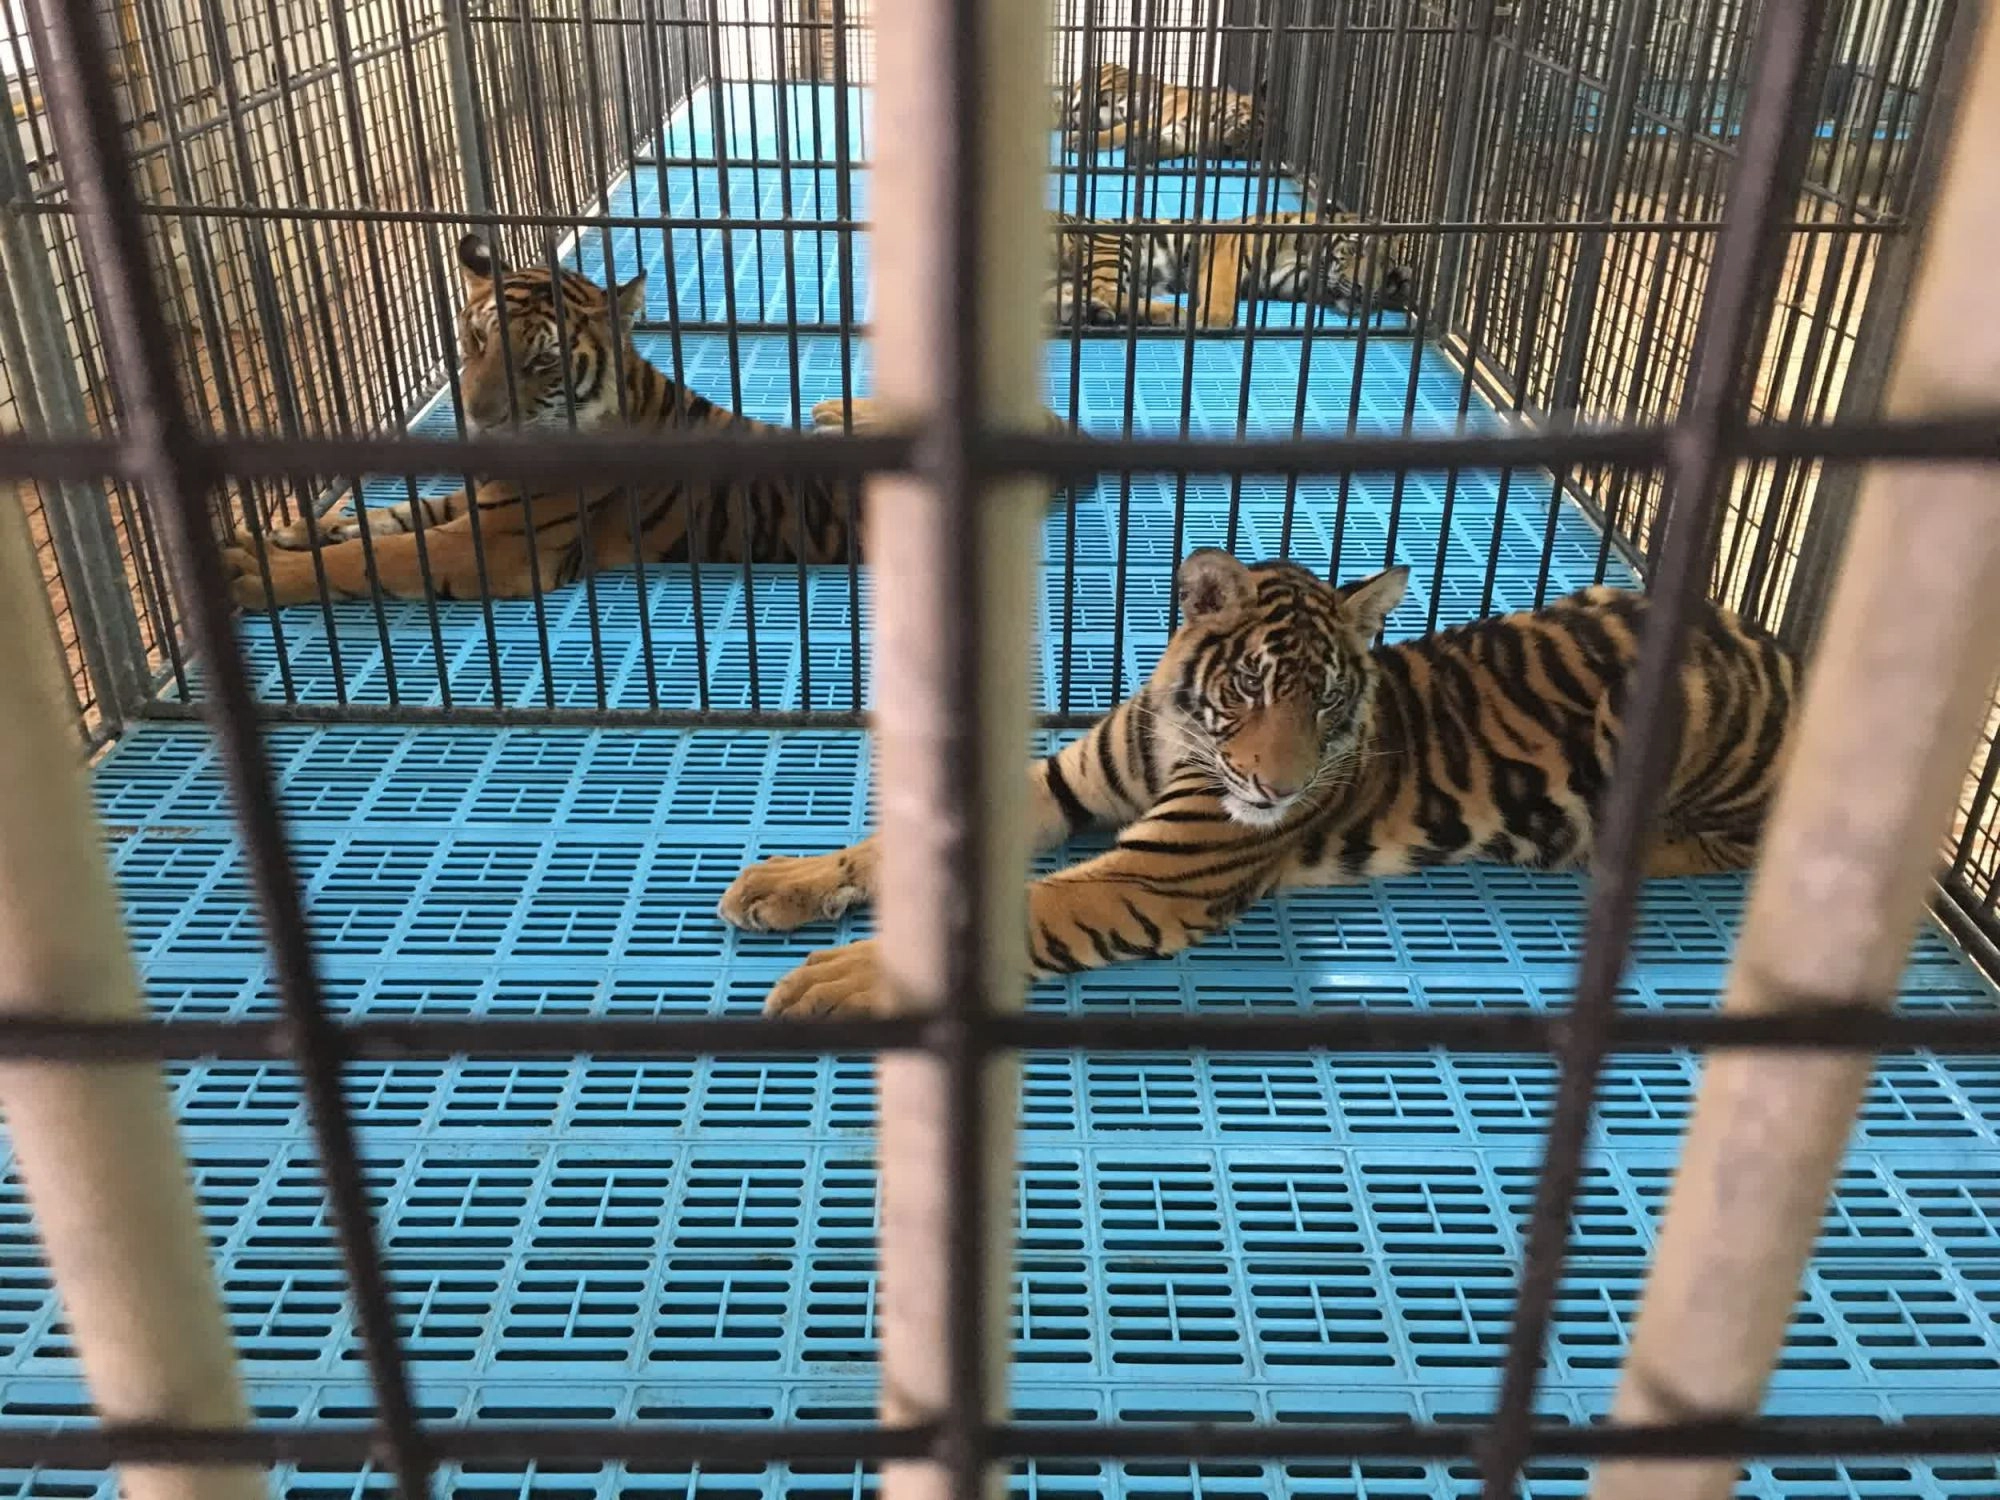 Tigers used for entertainment trapped in barren cages, Thailand